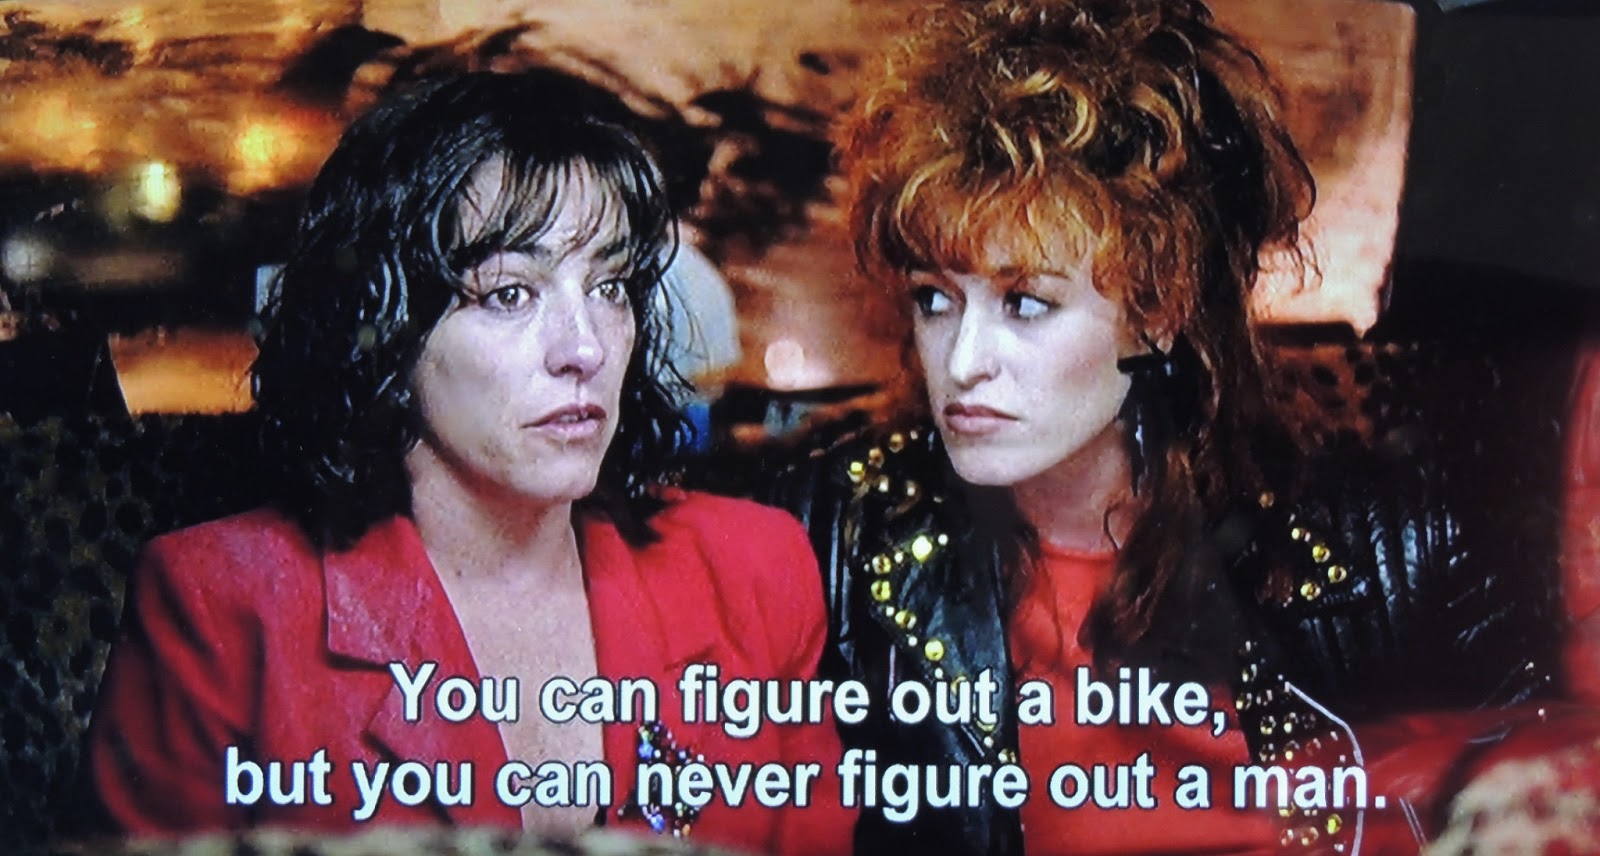 My Soul Is Raining Clothes: Style in Almodovar's 'Women on the Verge...'